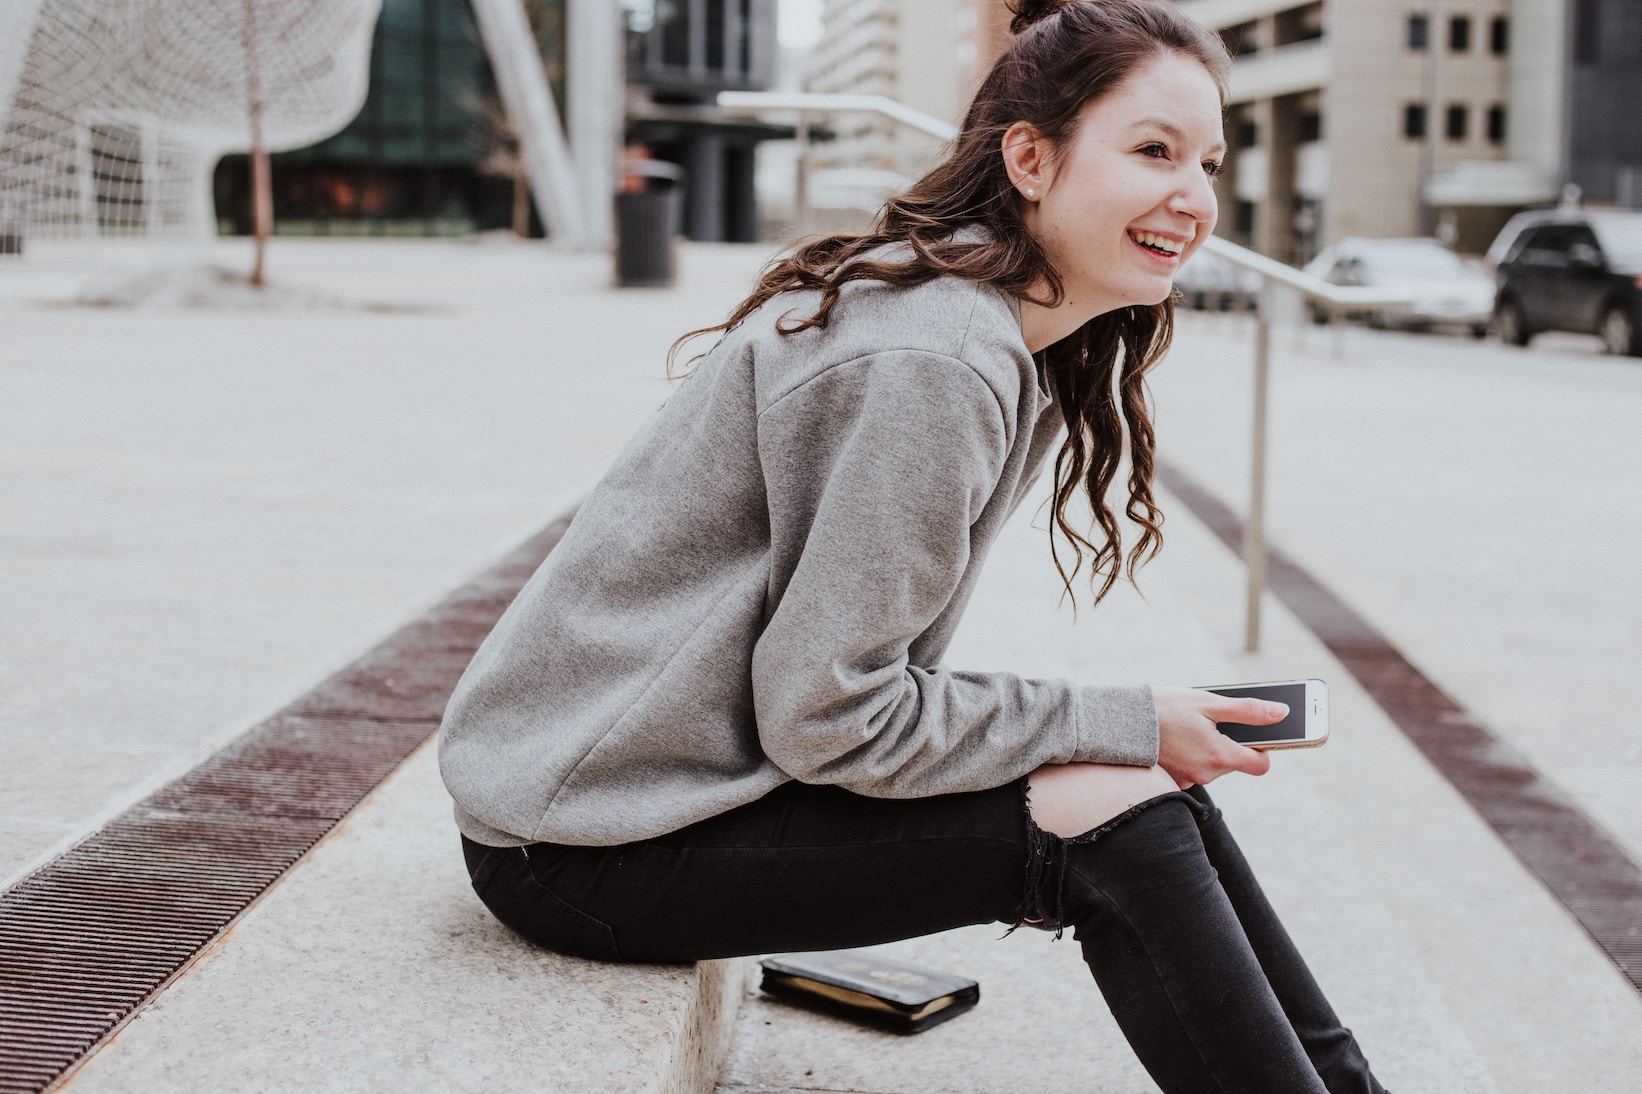 Woman sitting on step, holding smartphone and smiling